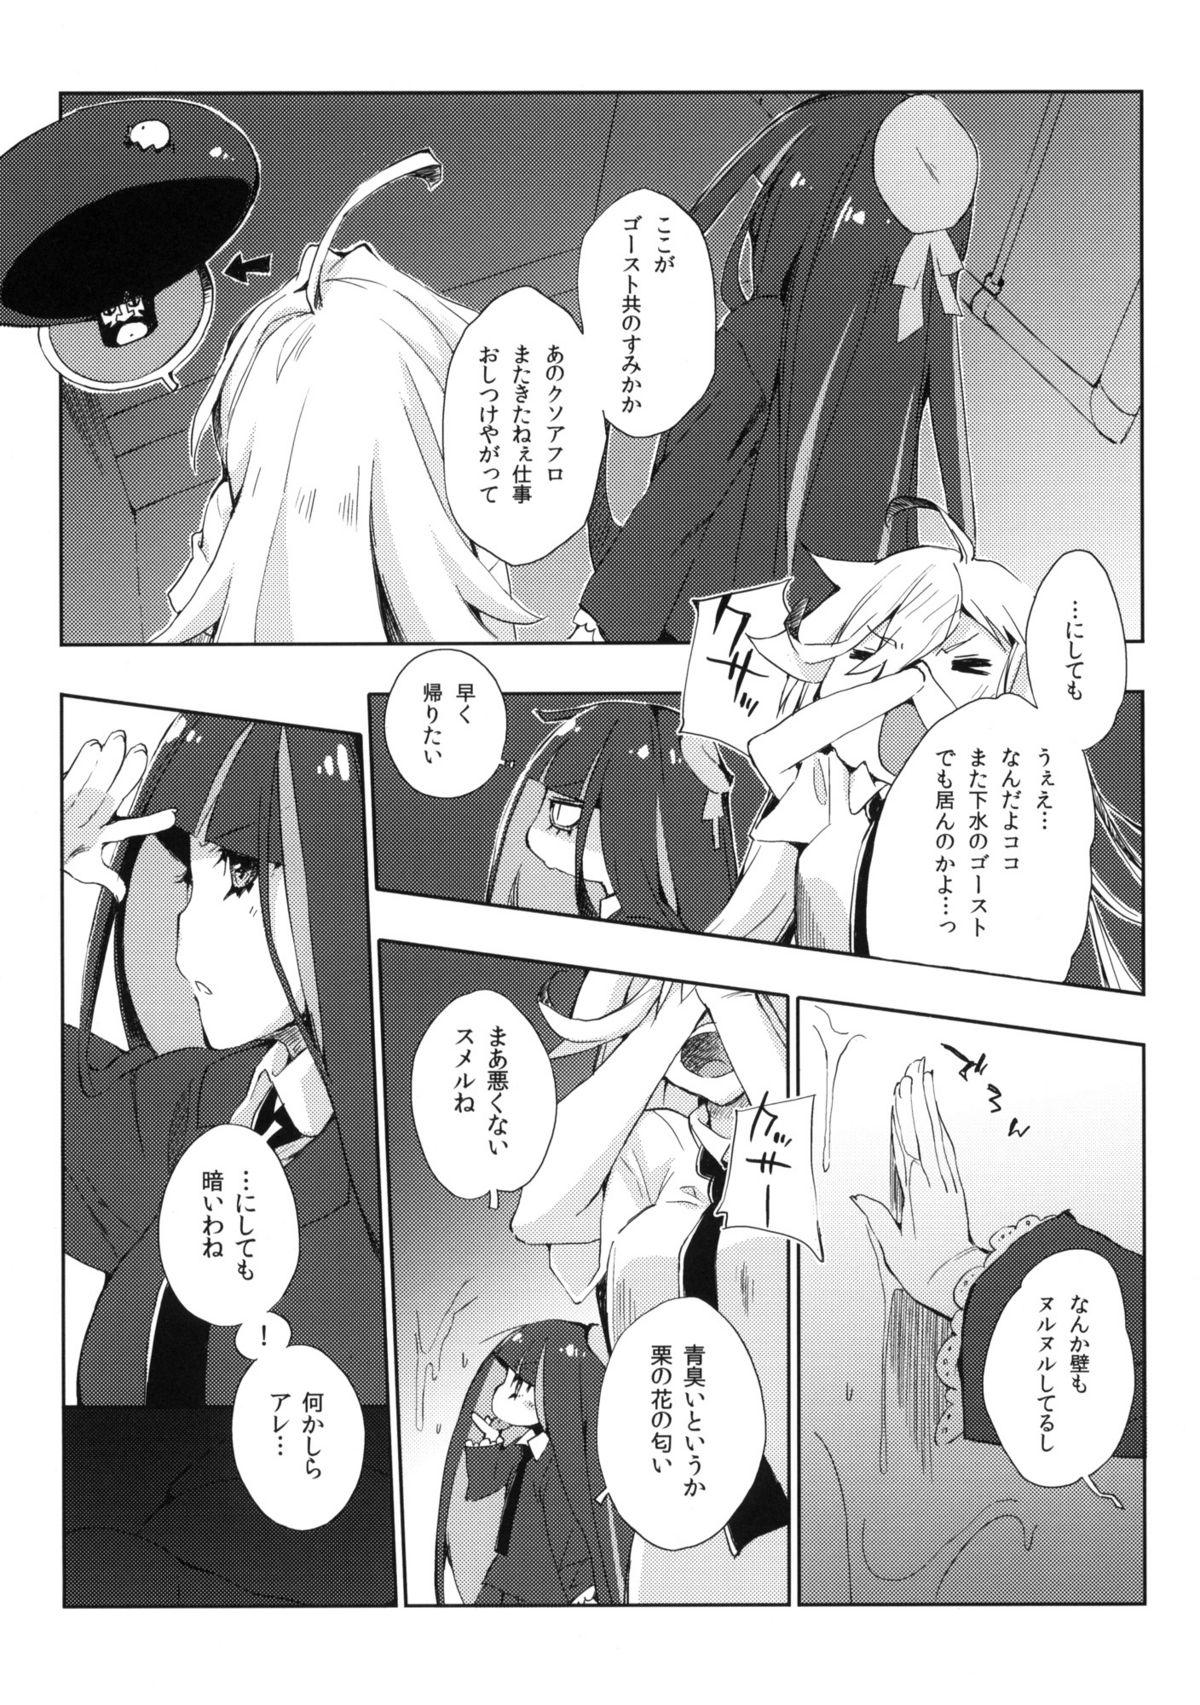 Cowgirl ¿inmoral unmoral? - Panty and stocking with garterbelt Raw - Page 4